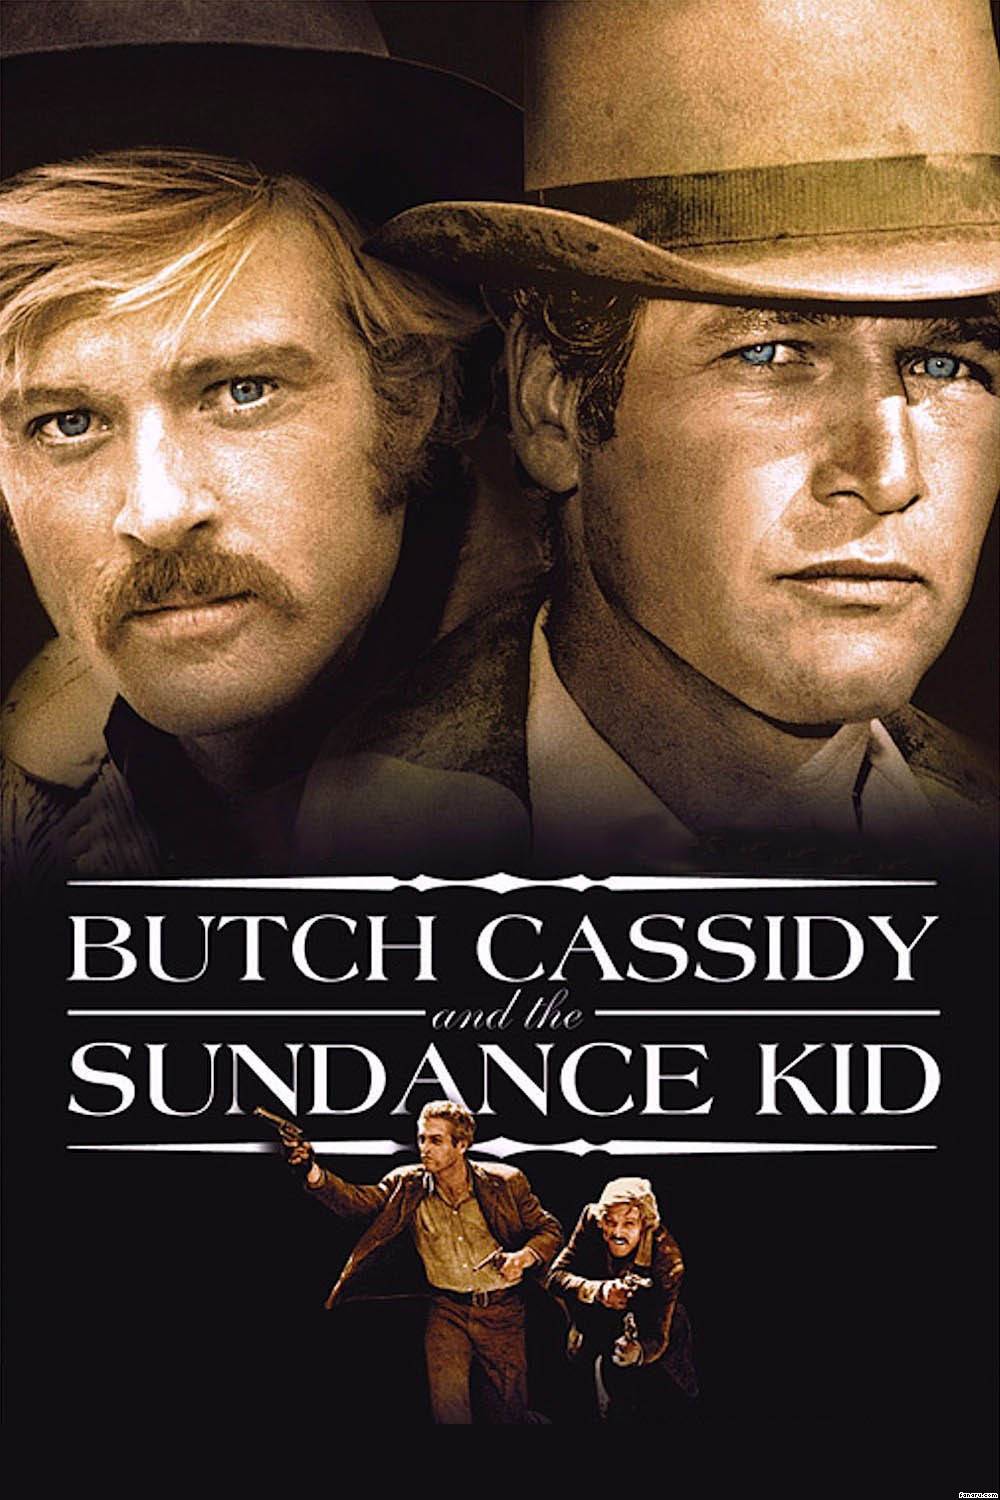 Analysis Of The Movie Butch Cassidy And